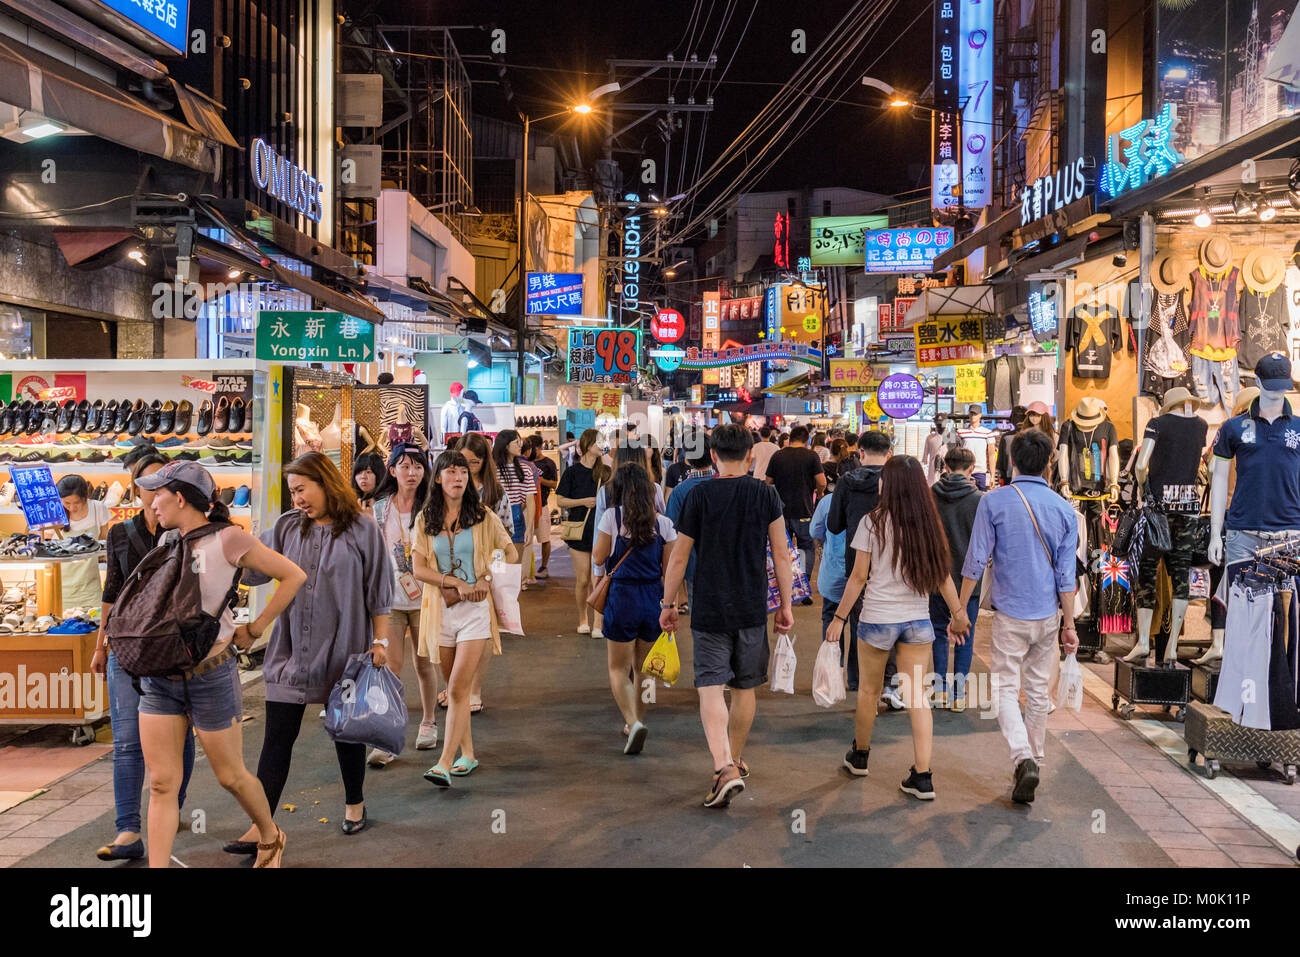 TAICHUNG, TAIWAN - JULY 18: This is a street in Fengjia night market the largest night market in Taiwan which is popular with tourists and locals on J Stock Photo